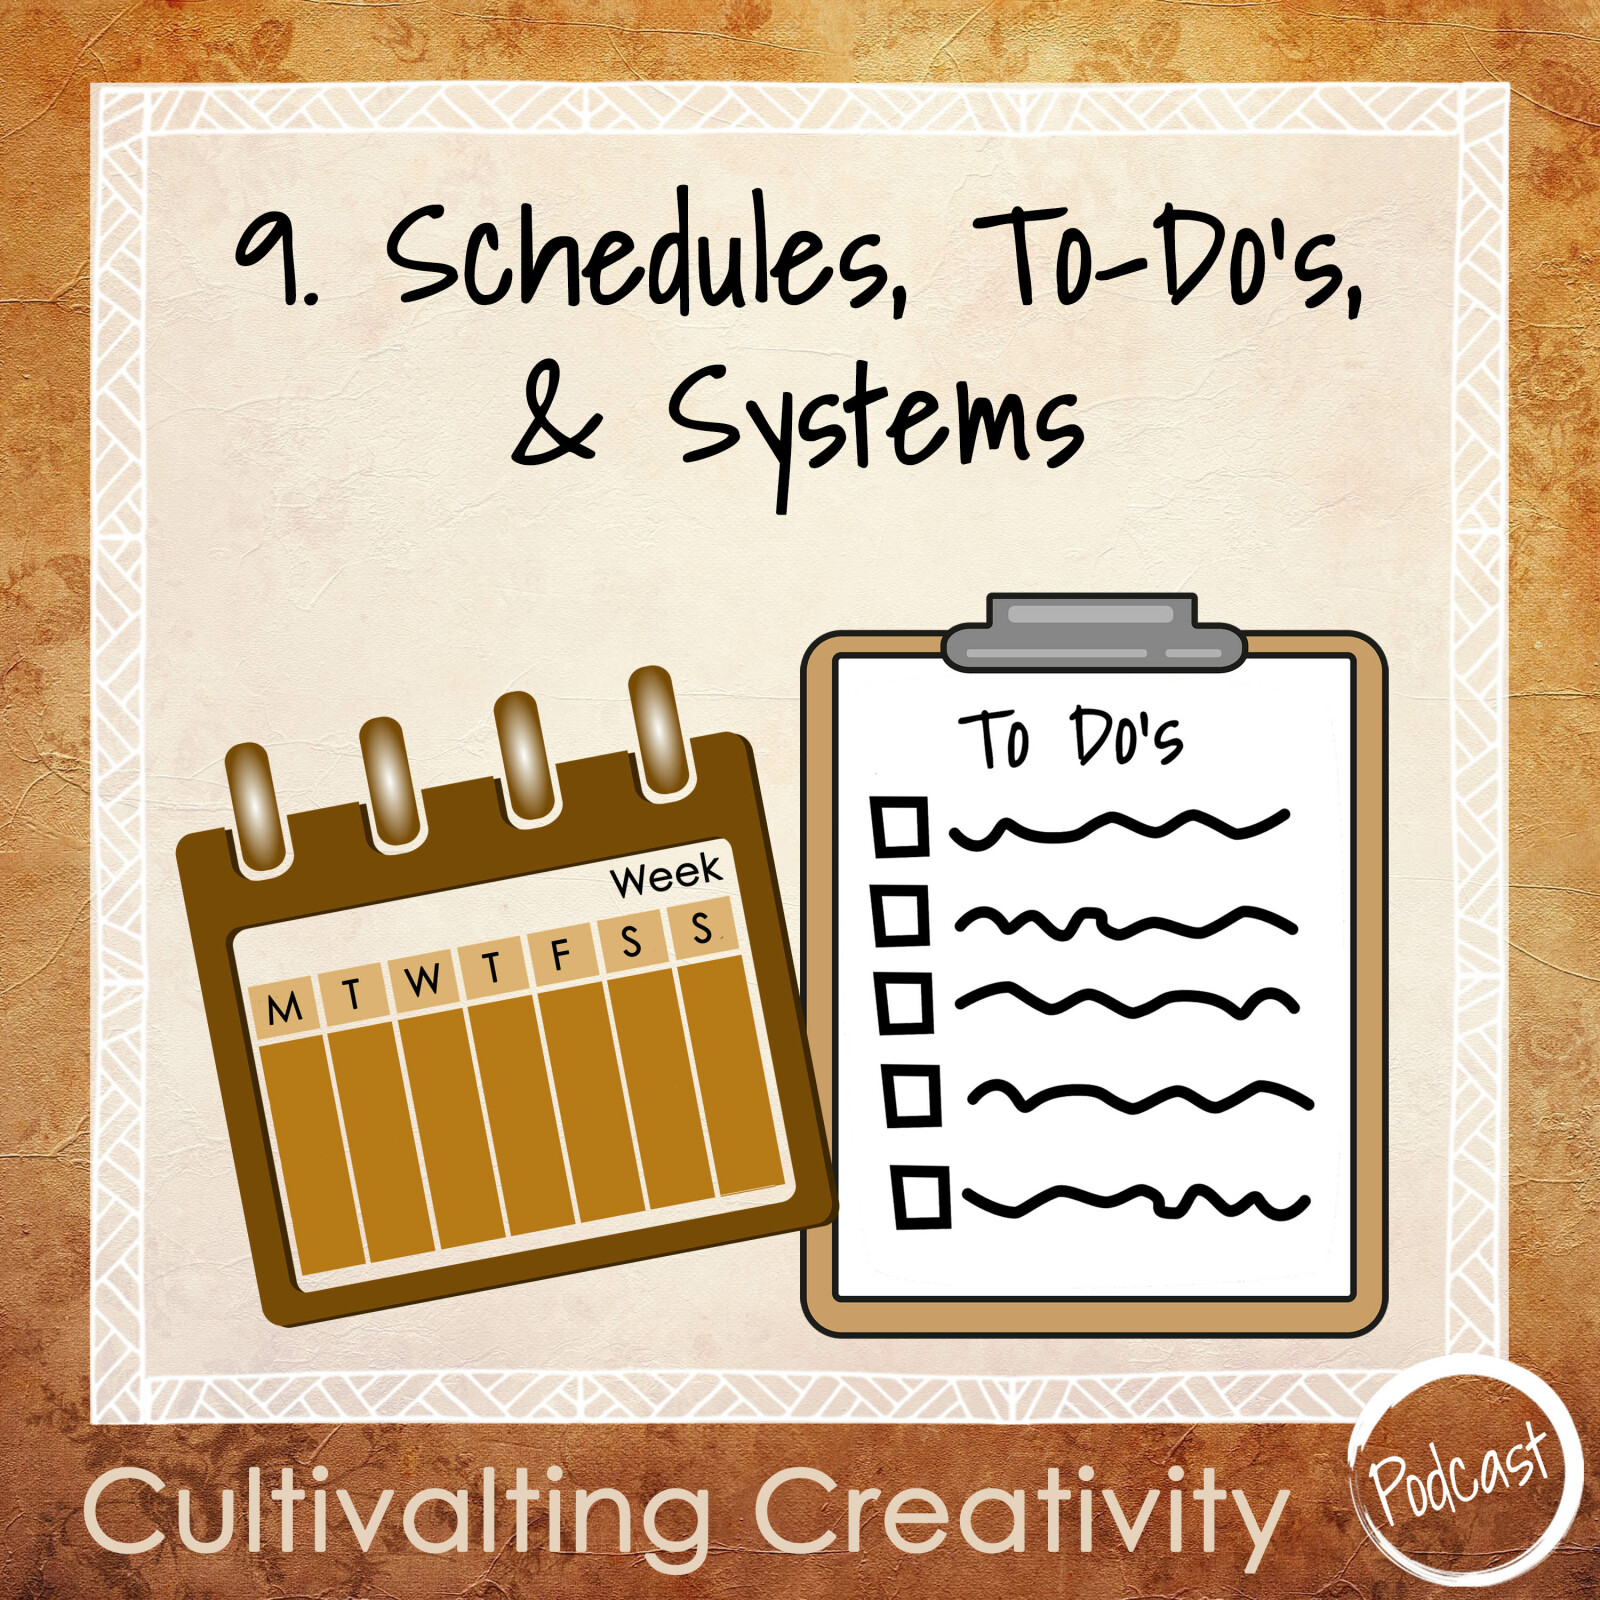 9. Schedules, To-Do's, & Systems